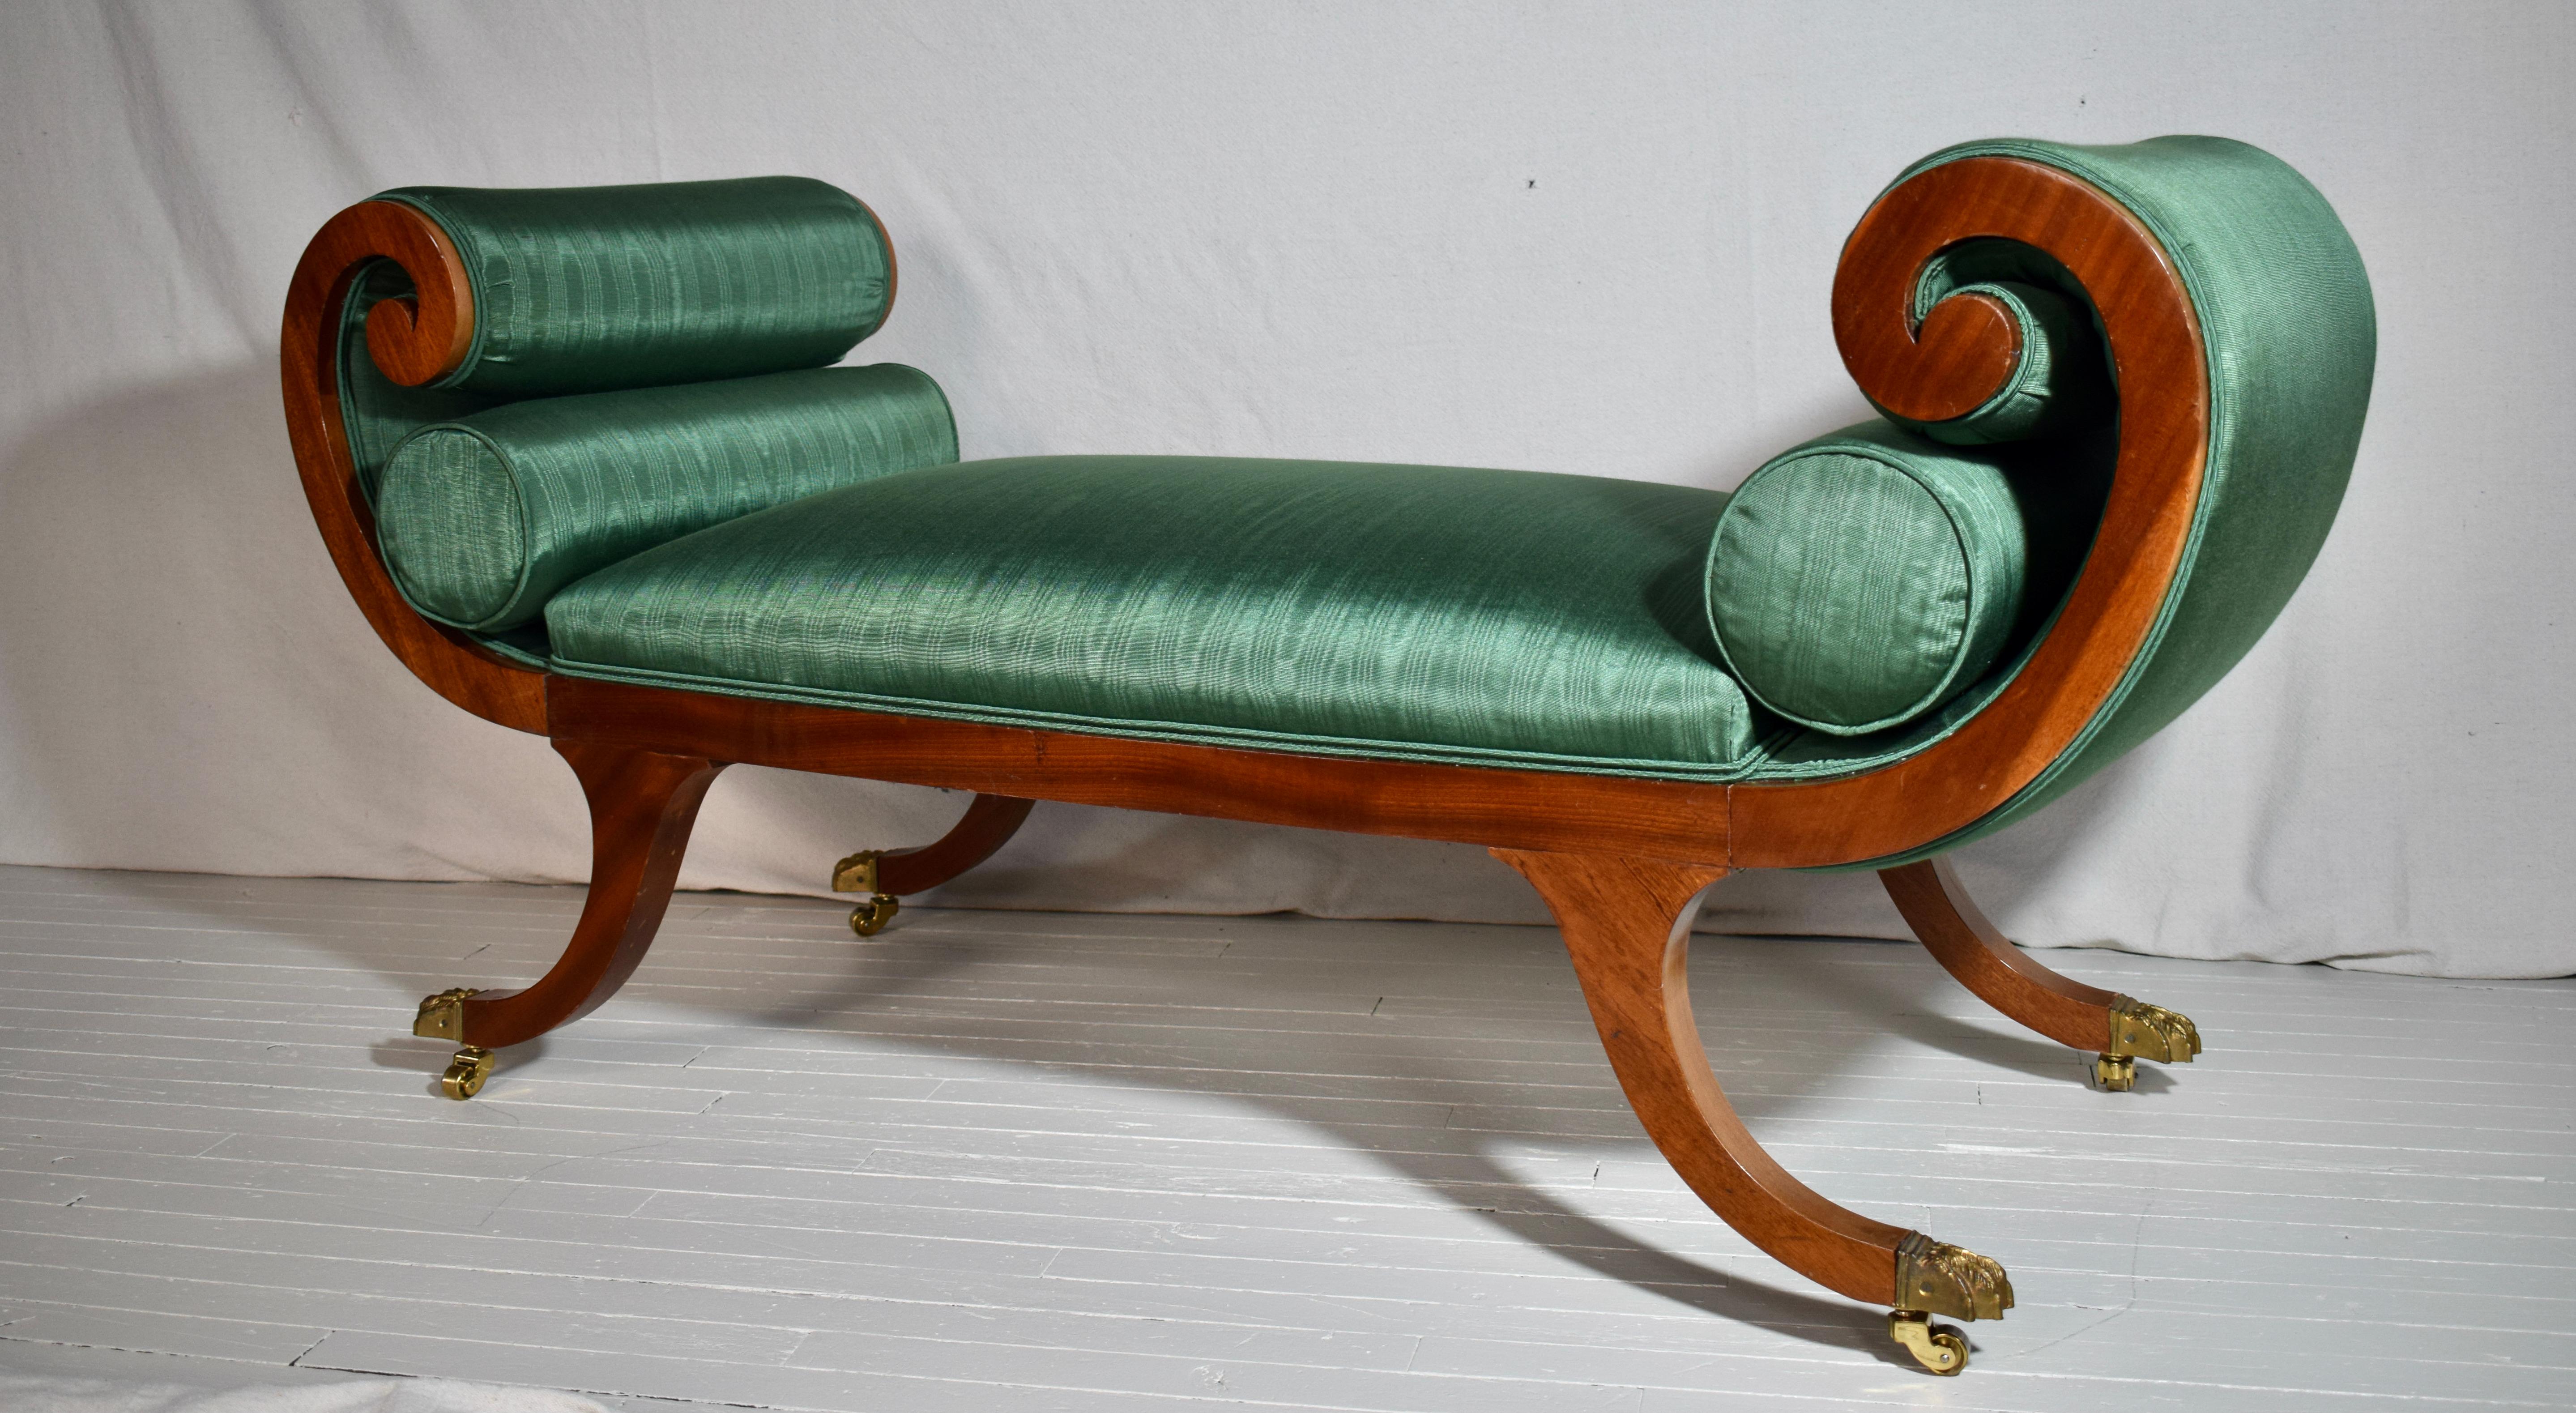 An elegant Mahogany scroll arm Recamiere, Meridian or window bench much like Maitland Smith or Baker pieces. Features Include new custom Moire upholstery, two bolster cushions with brass paw feet and casters. The Mahogany wood grains & vibrant green